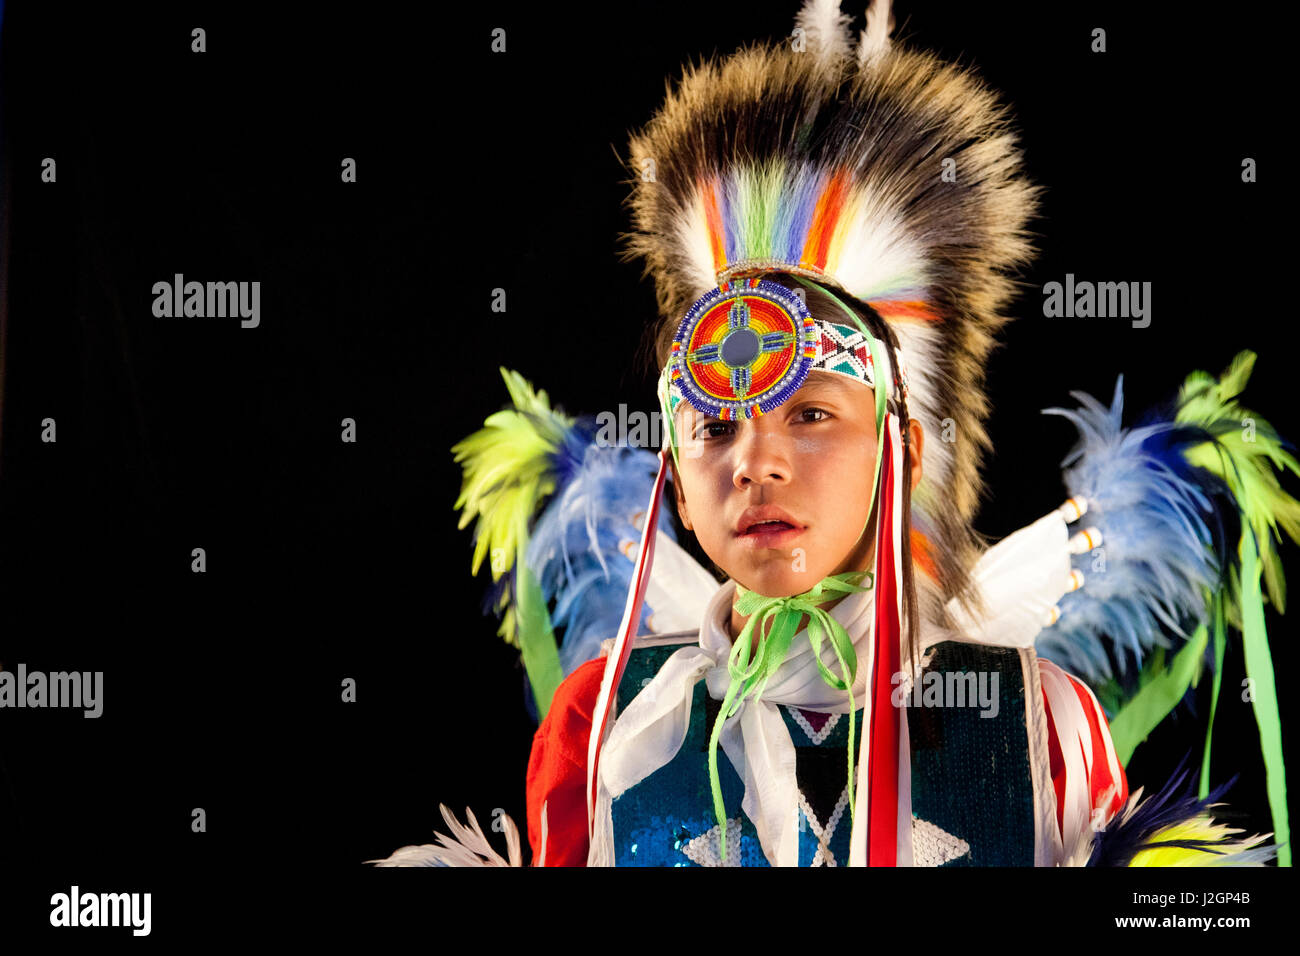 Fancy bustle dancer Pacer Allan Tobey (Assiniboine, Sioux) dressed in pow wow regalia of colorful feathered bustles, apron and roach headdress holds two dance sticks with streamers. Stock Photo